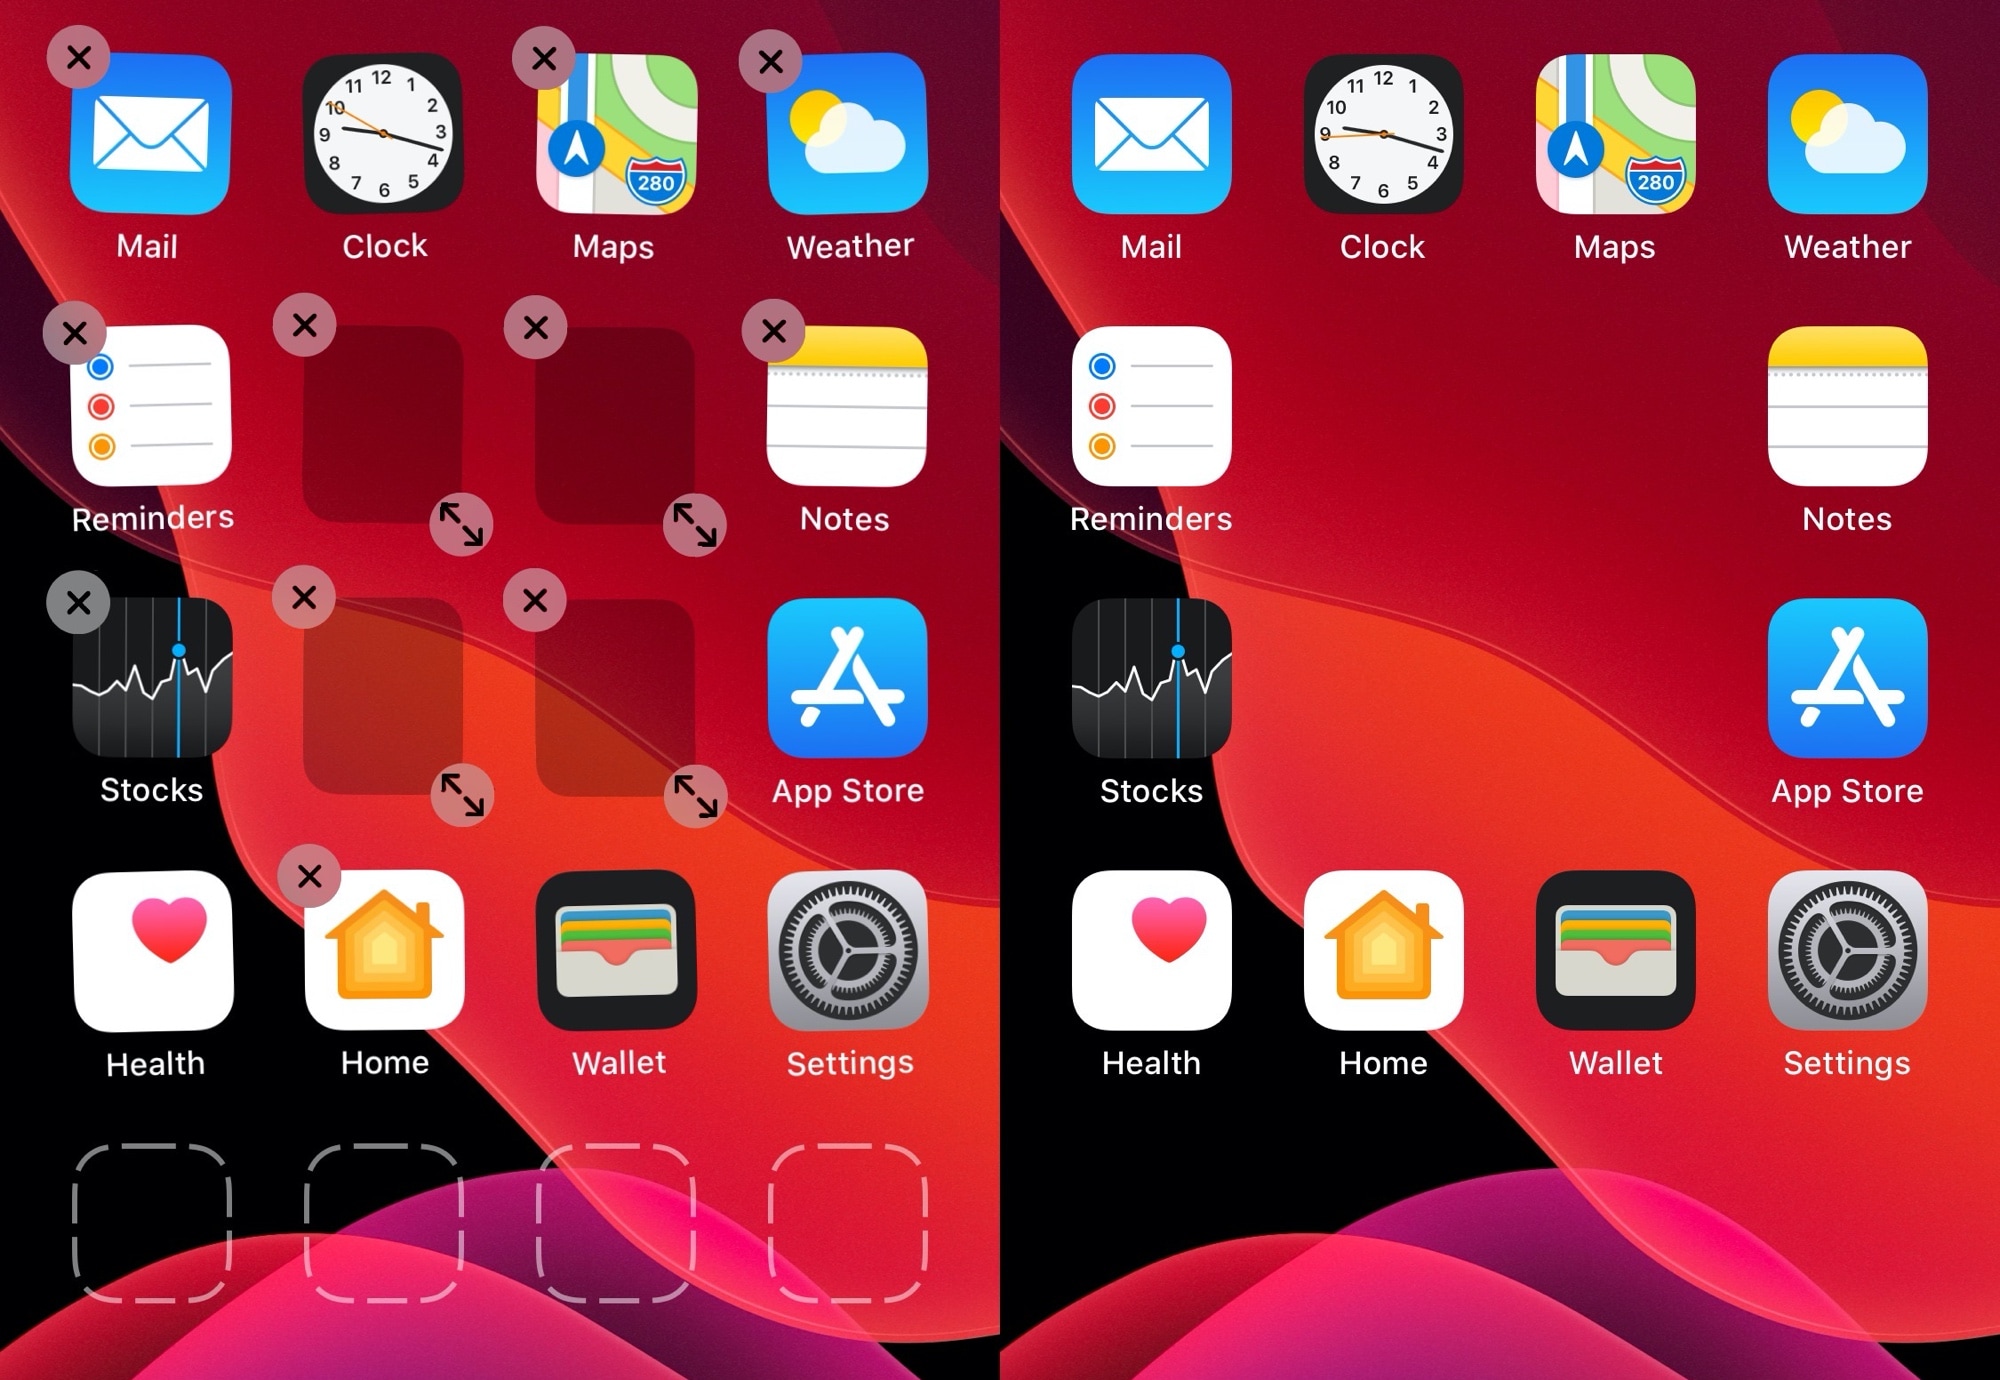 HSWidgets is a beautiful and free way to add widgets to your Home Screen